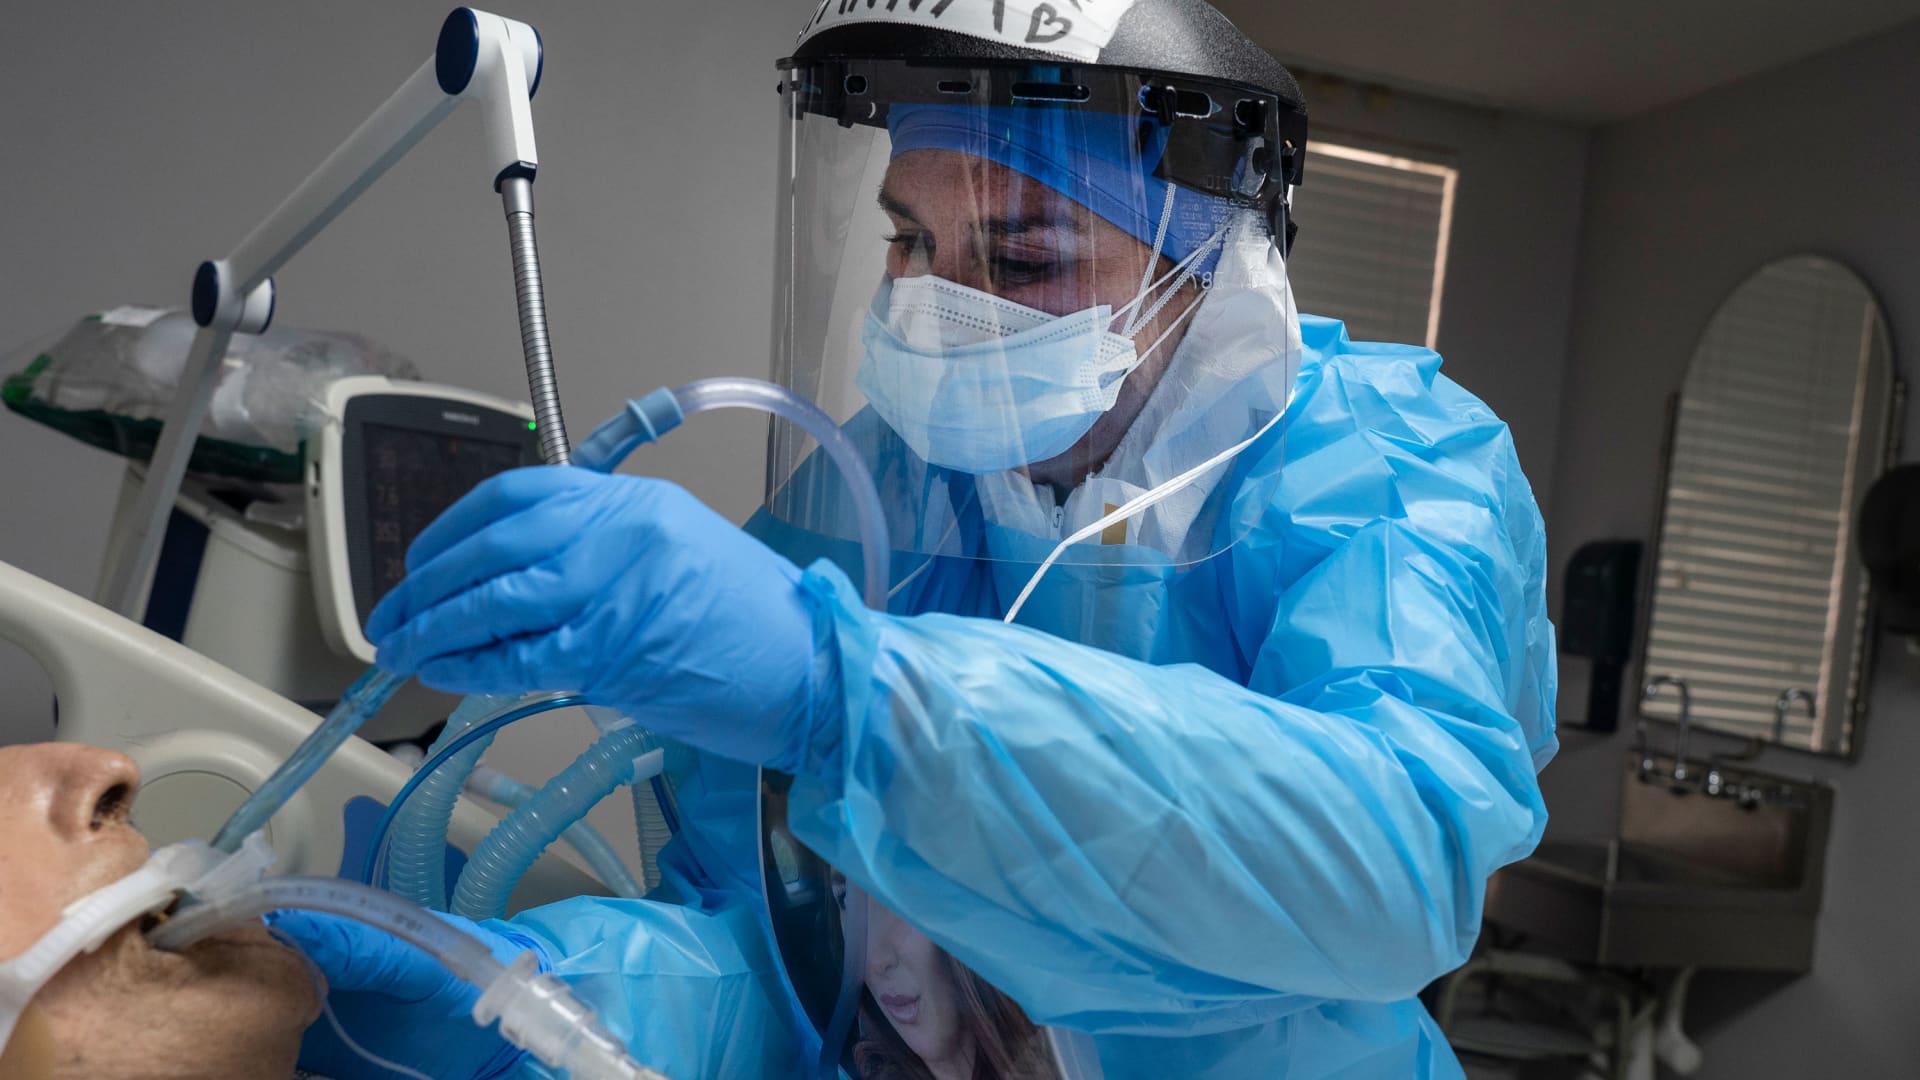 A medical staff member treats a patient suffering from coronavirus in the COVID-19 intensive care unit (ICU) at the United Memorial Medical Center (UMMC) on November 10, 2020 in Houston, Texas.